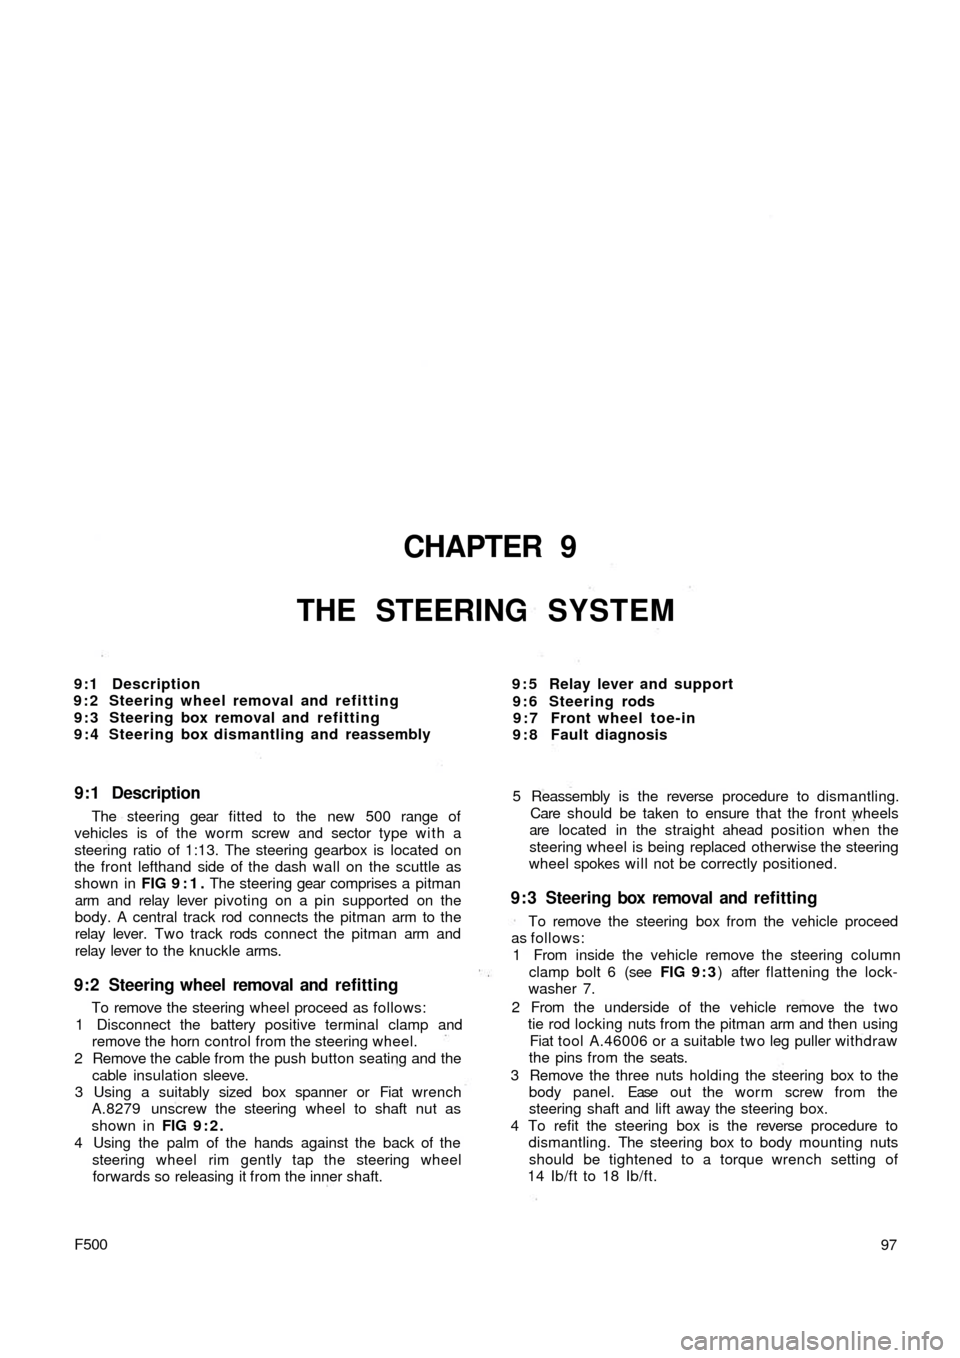 FIAT 500 1957 1.G Manual Online CHAPTER 9
THE STEERING SYSTEM
9 : 5 Relay lever and support
9 : 6 Steering rods
9 : 7 Front wheel toe-in
9 : 8 Fault diagnosis 9:1 Description
9 : 2 Steering wheel removal and refitting
9 : 3 Steering